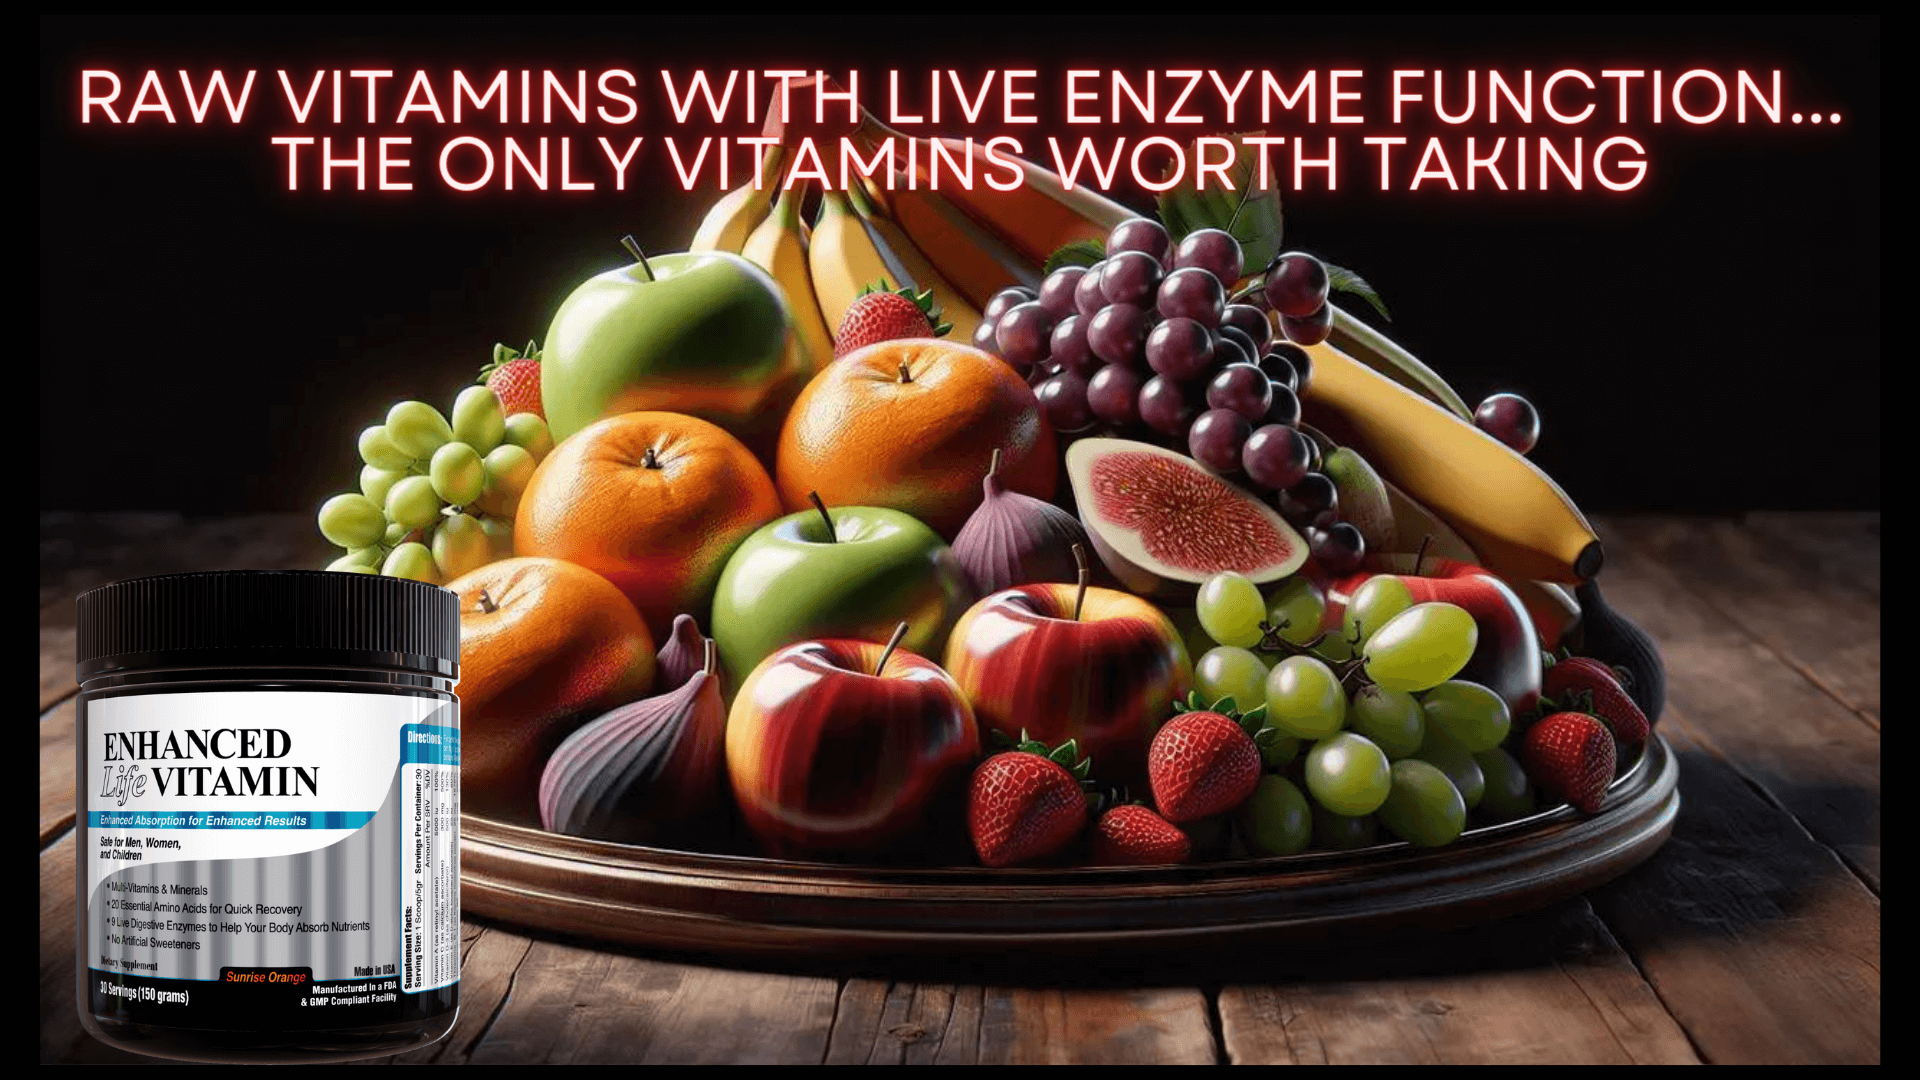 Raw Vitamins with Live Enzyme Function...the only Vitamins worth taking